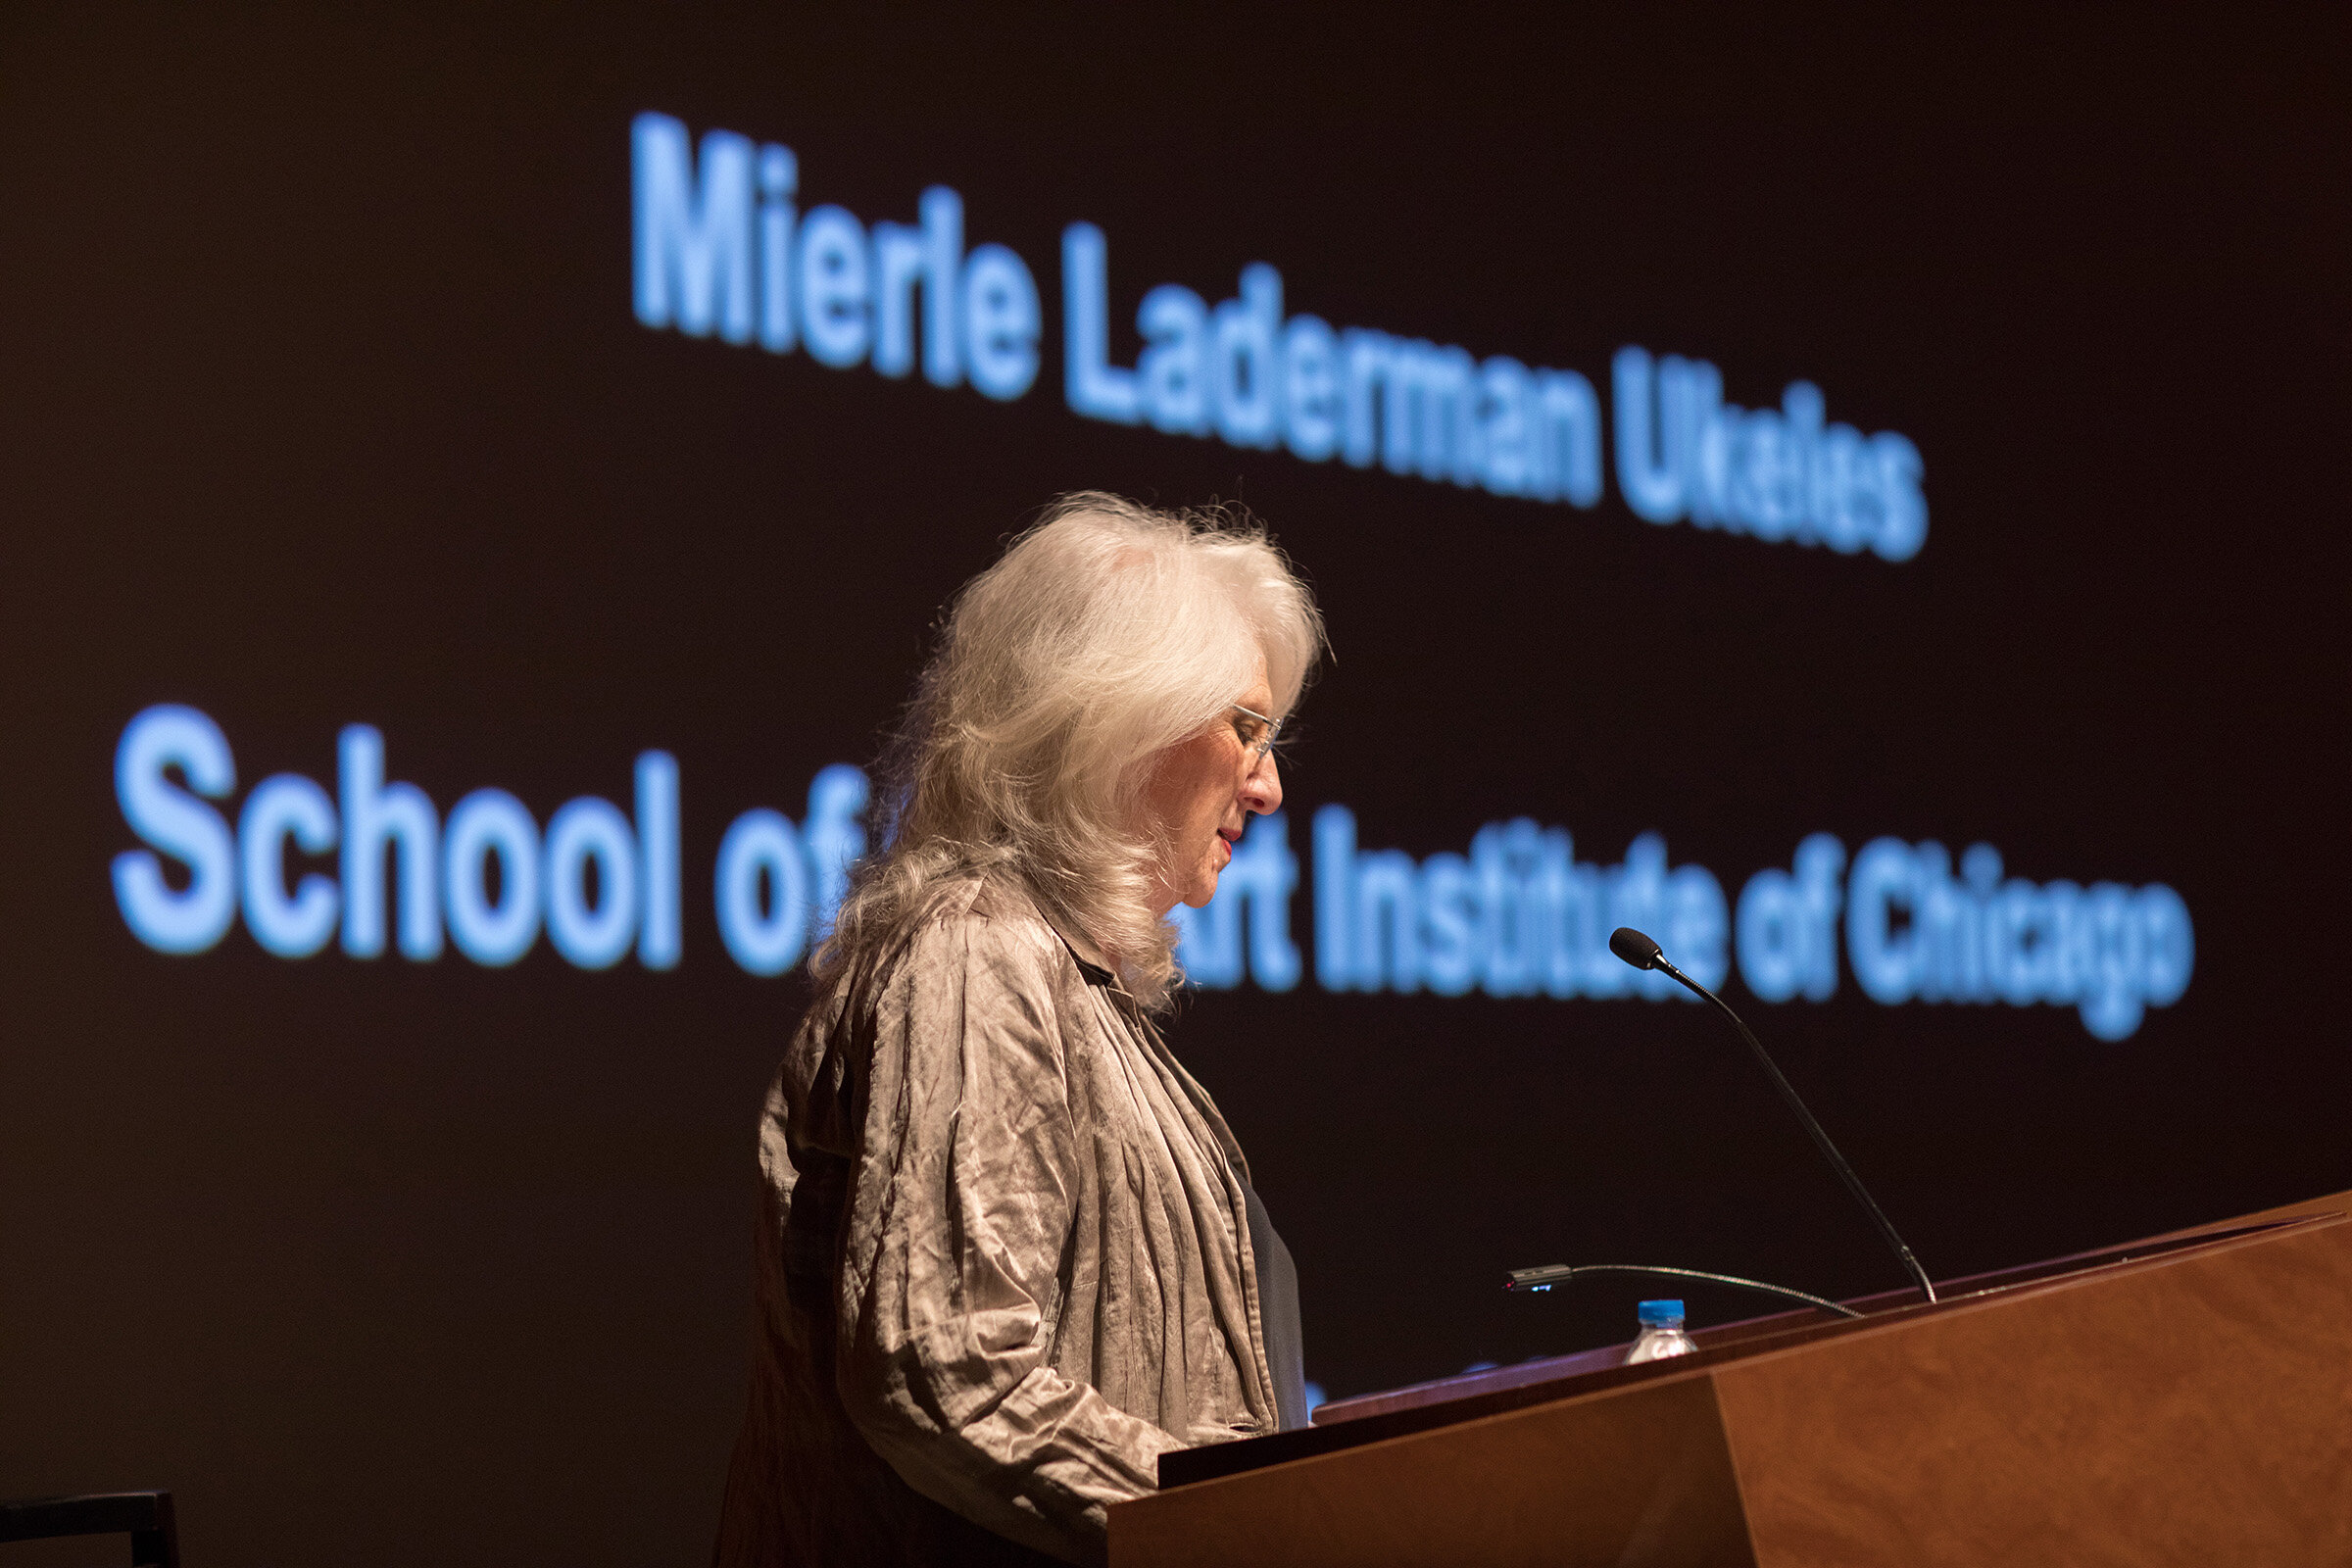  Visiting Artists Program Lecture: Mierle Laderman Ukeles, The Art Institute of Chicago, Rubloff Auditorium, 2019 